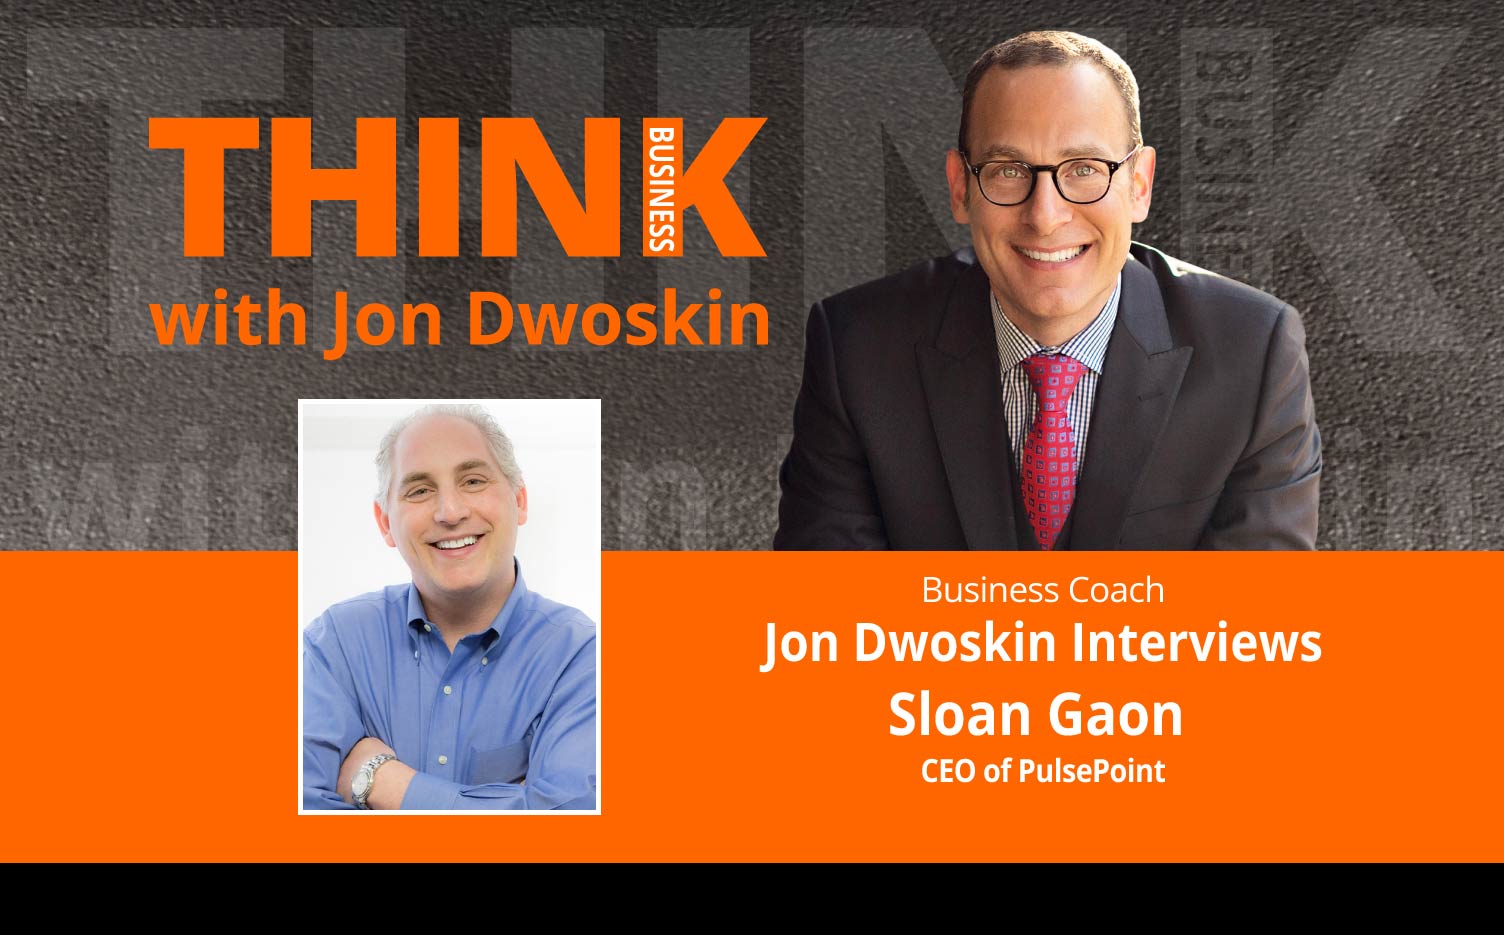 THINK Business Podcast: Jon Dwoskin Interviews Sloan Gaon, CEO of PulsePoint